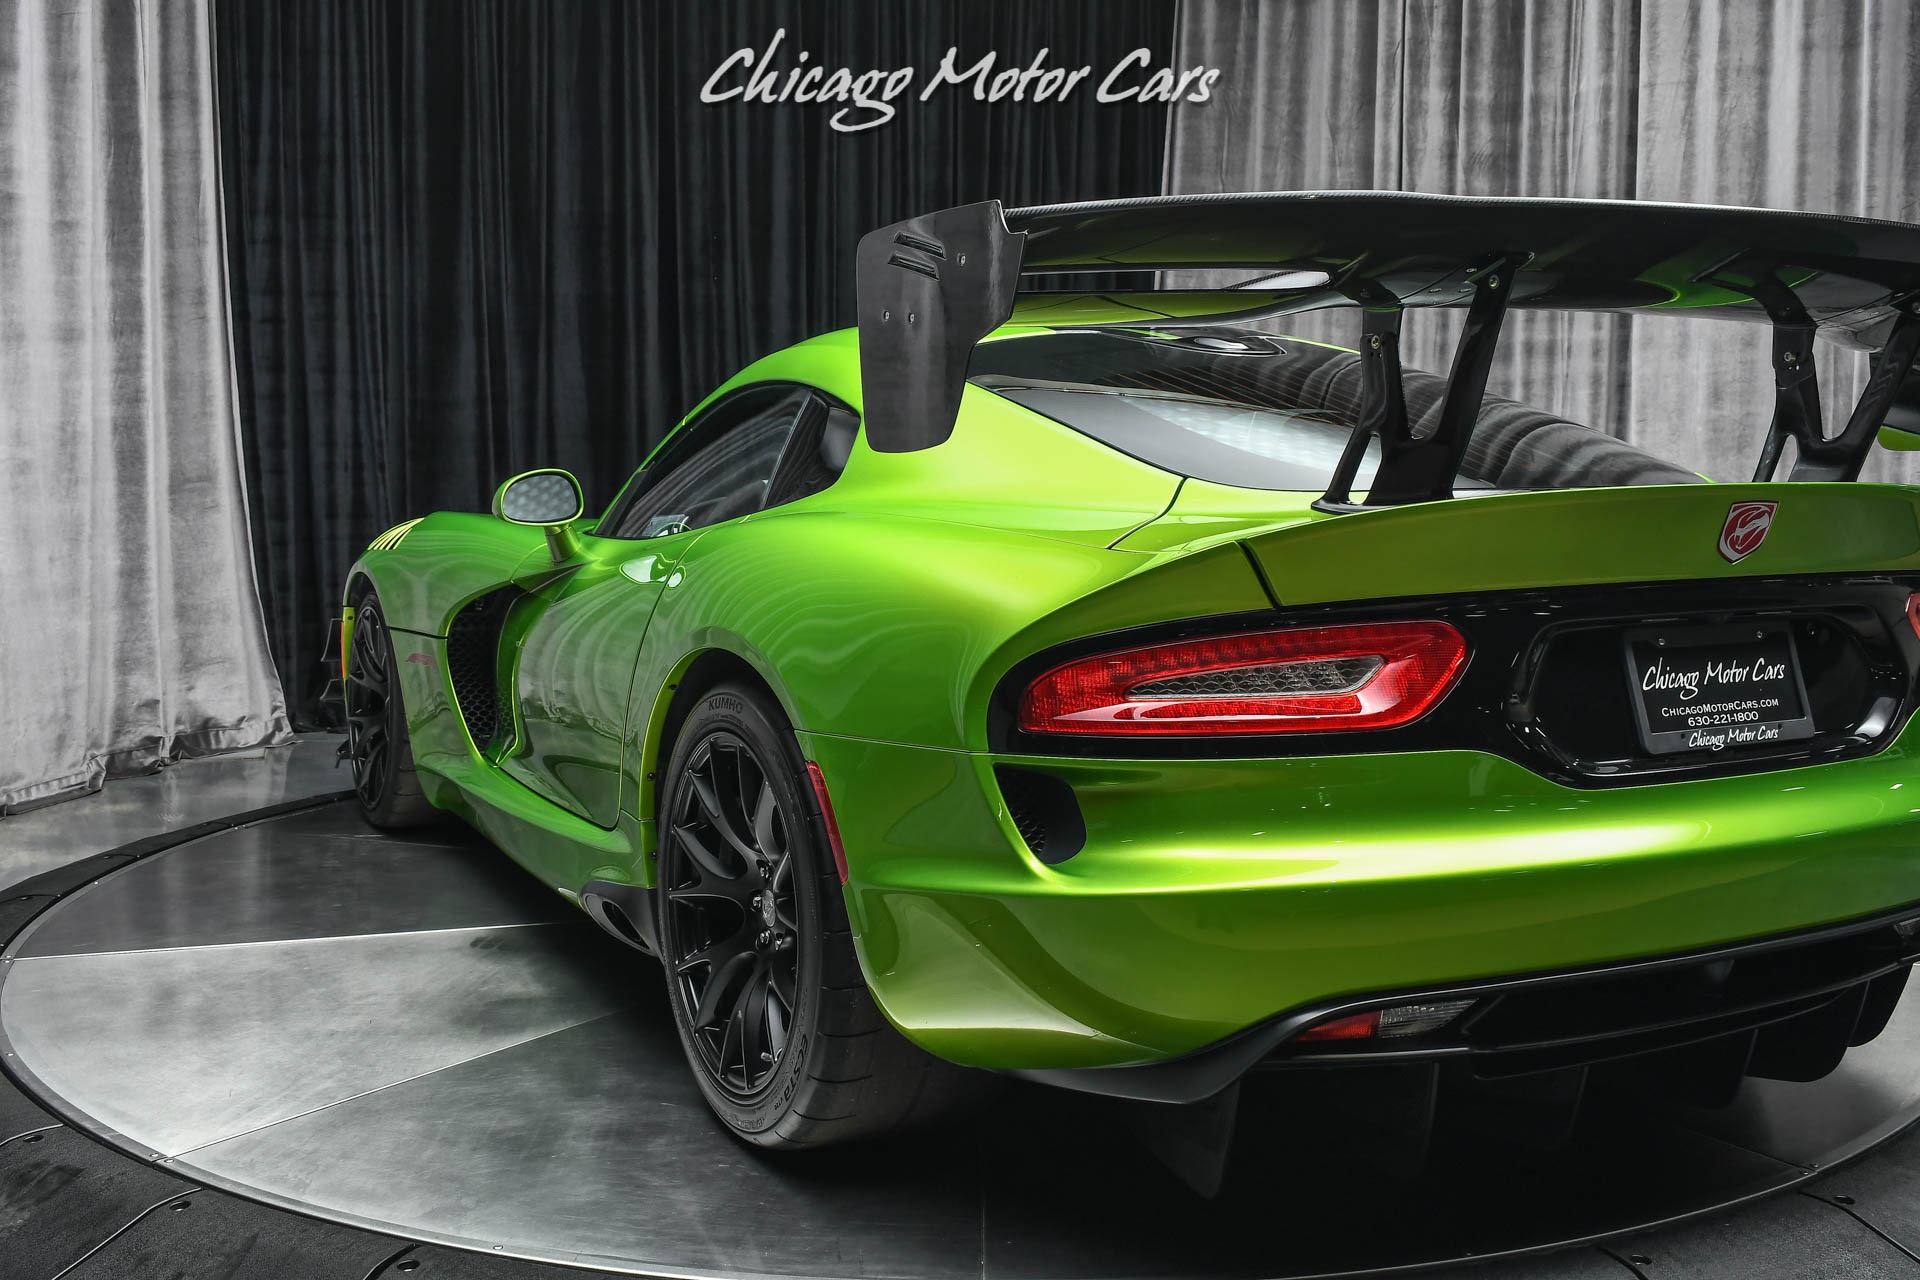 Used-2017-Dodge-Viper-ACR-Extreme-131-Produced-Extremely-Rare-Ceased-Production